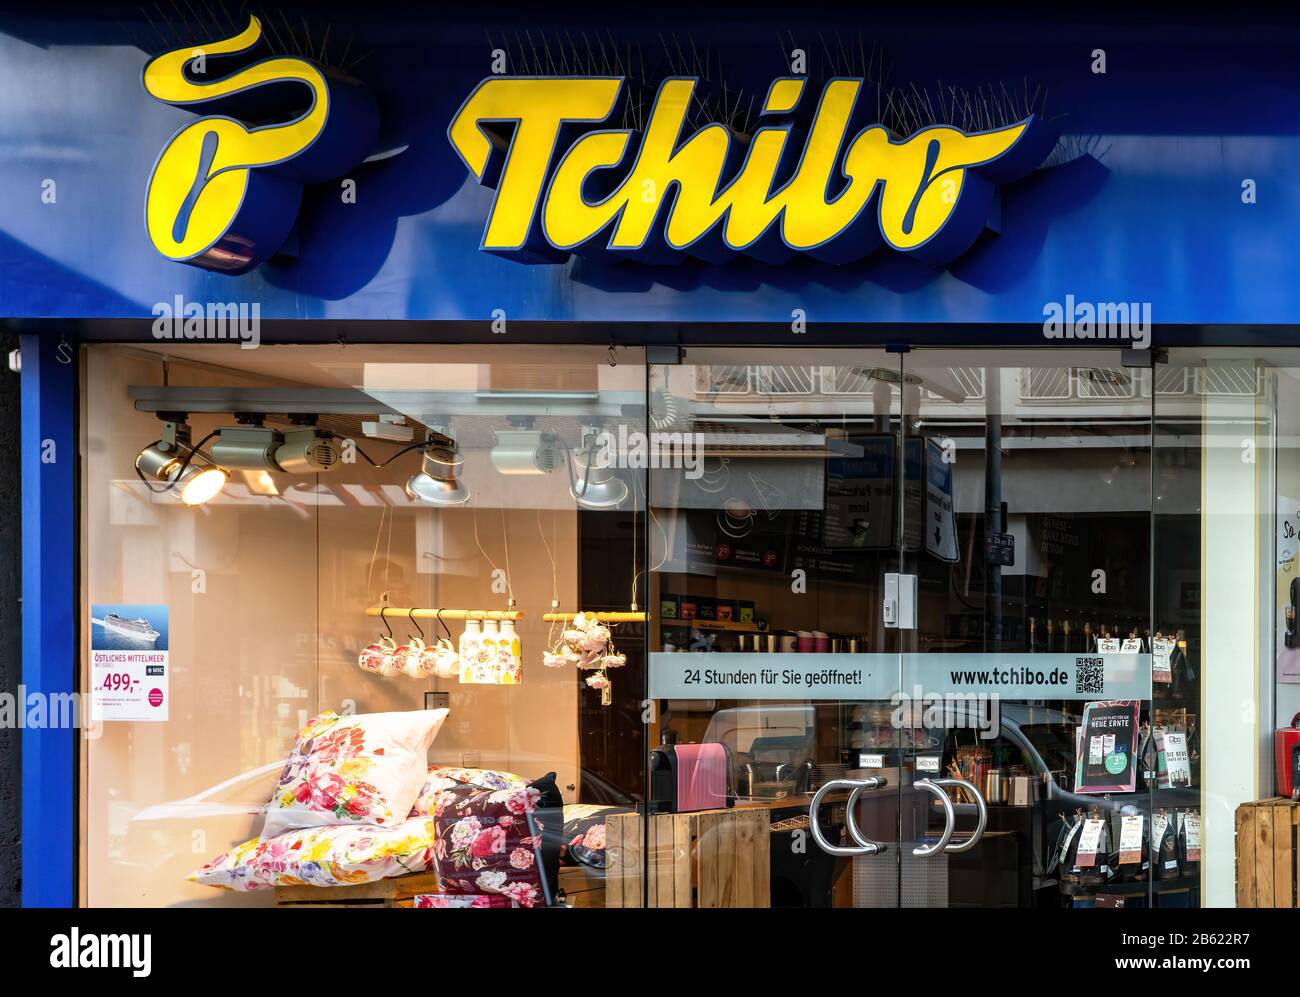 Frankfurt,Germany, 03/01/2020: Tchibo Logo on a Shop. Tchibo is a German  chain of coffee retailers and cafes Stock Photo - Alamy